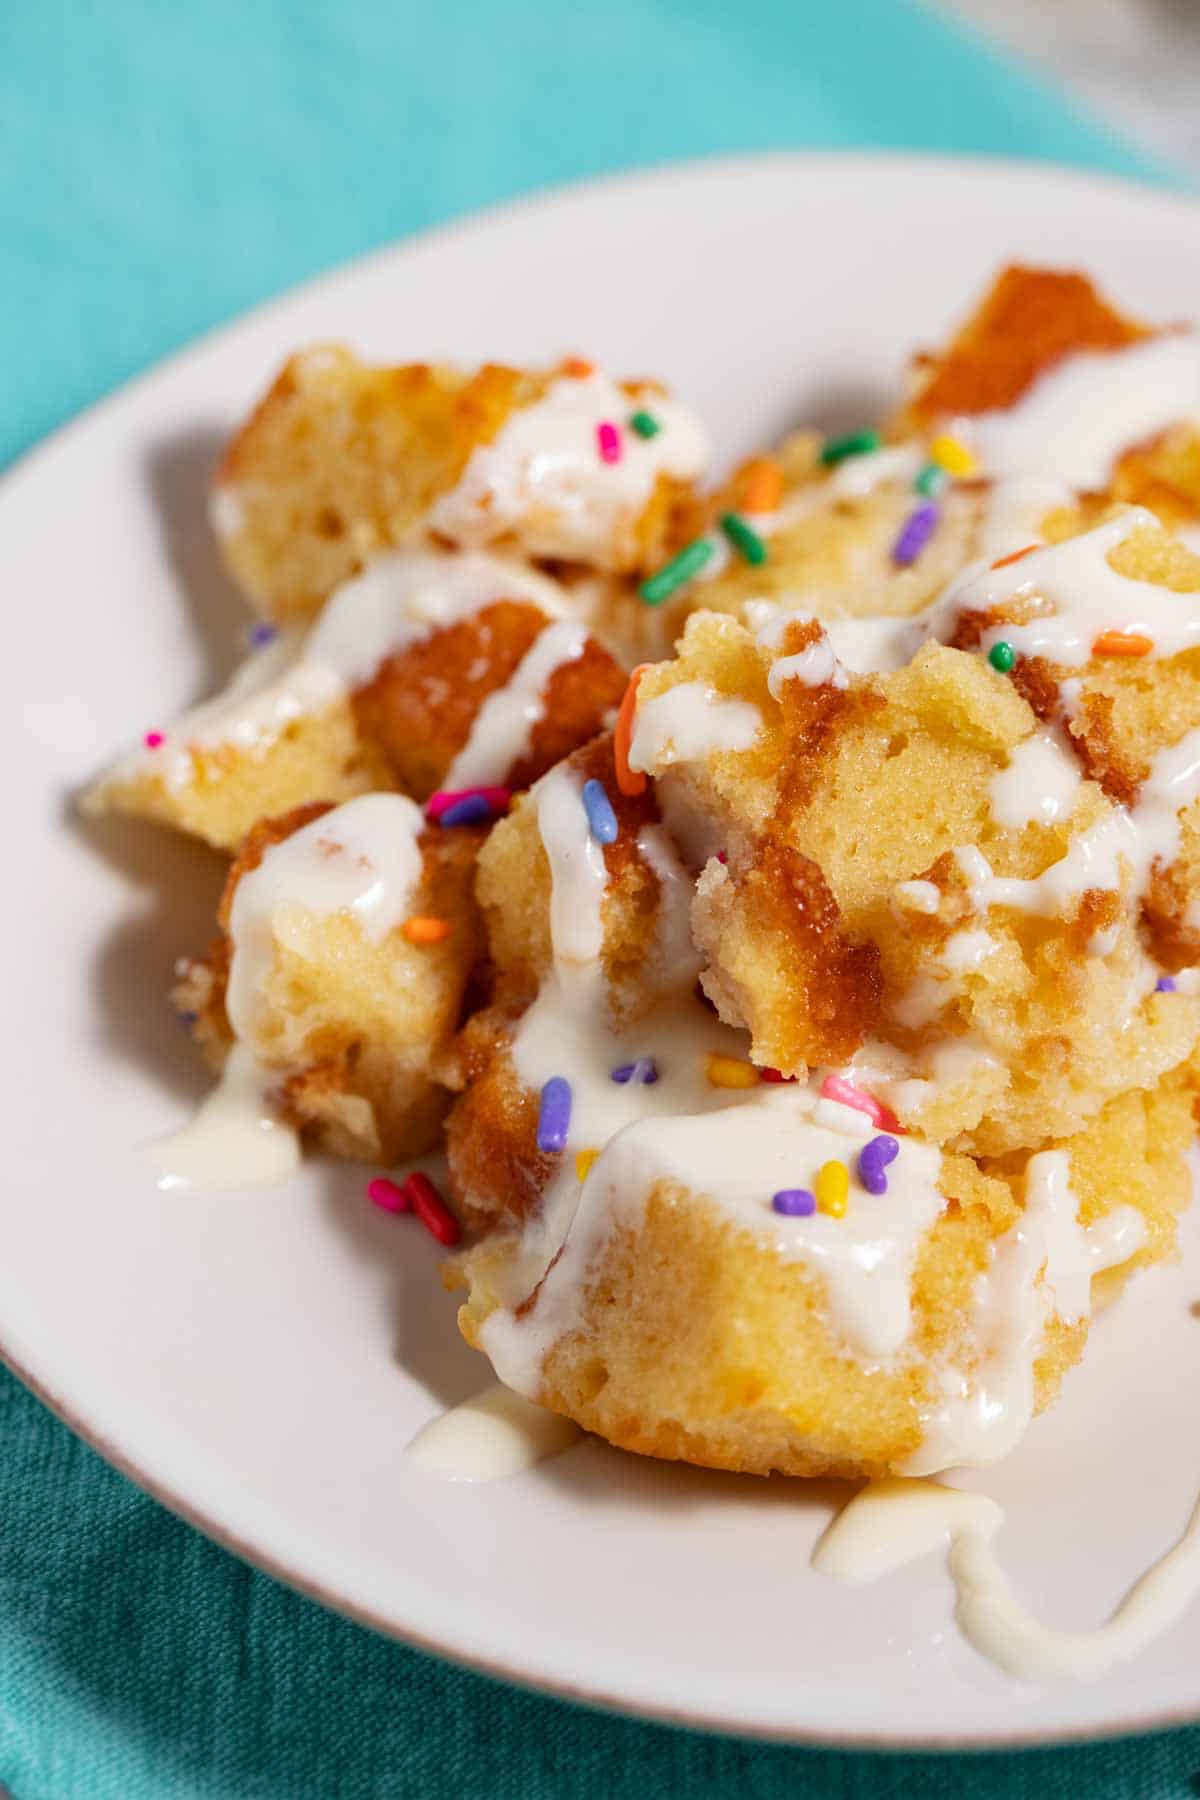 Plate of leftover cake bread pudding with vanilla sauce and sprinkles.